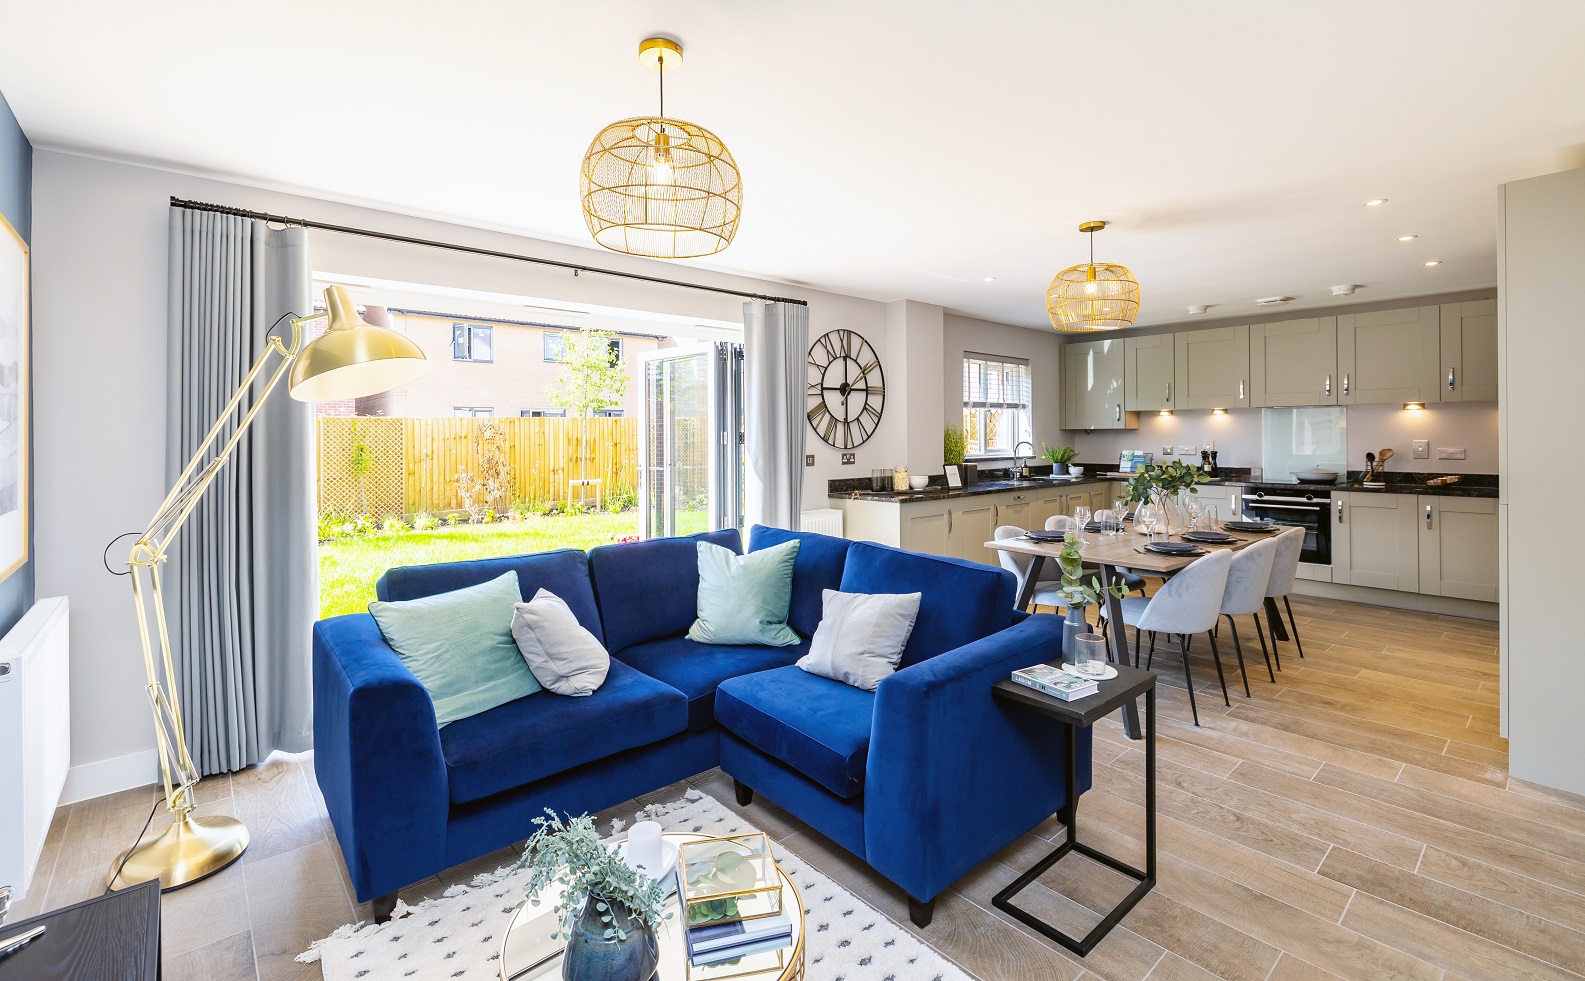 New Homes Week 2023: Find your perfect home with Curo